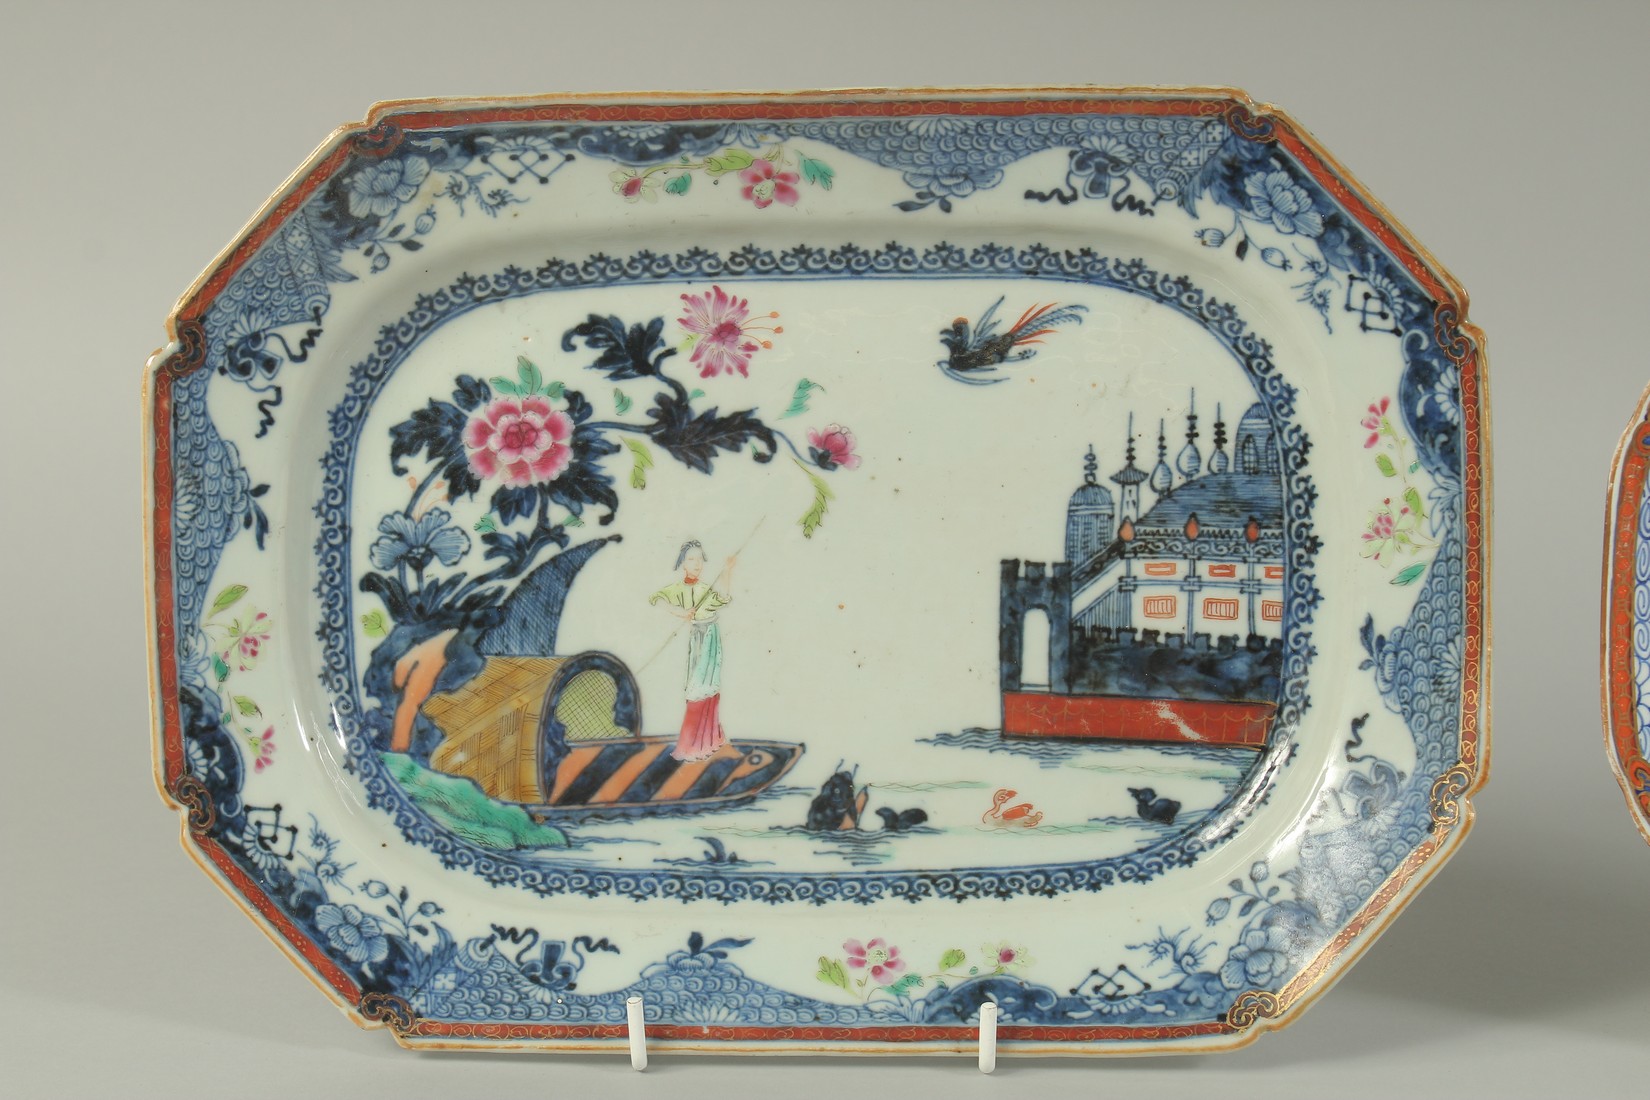 A DERBY PLATE AND EARLIER CHINESE PORCELAIN DISH of the same pattern. Clobbered decoration. Circa - Bild 2 aus 6